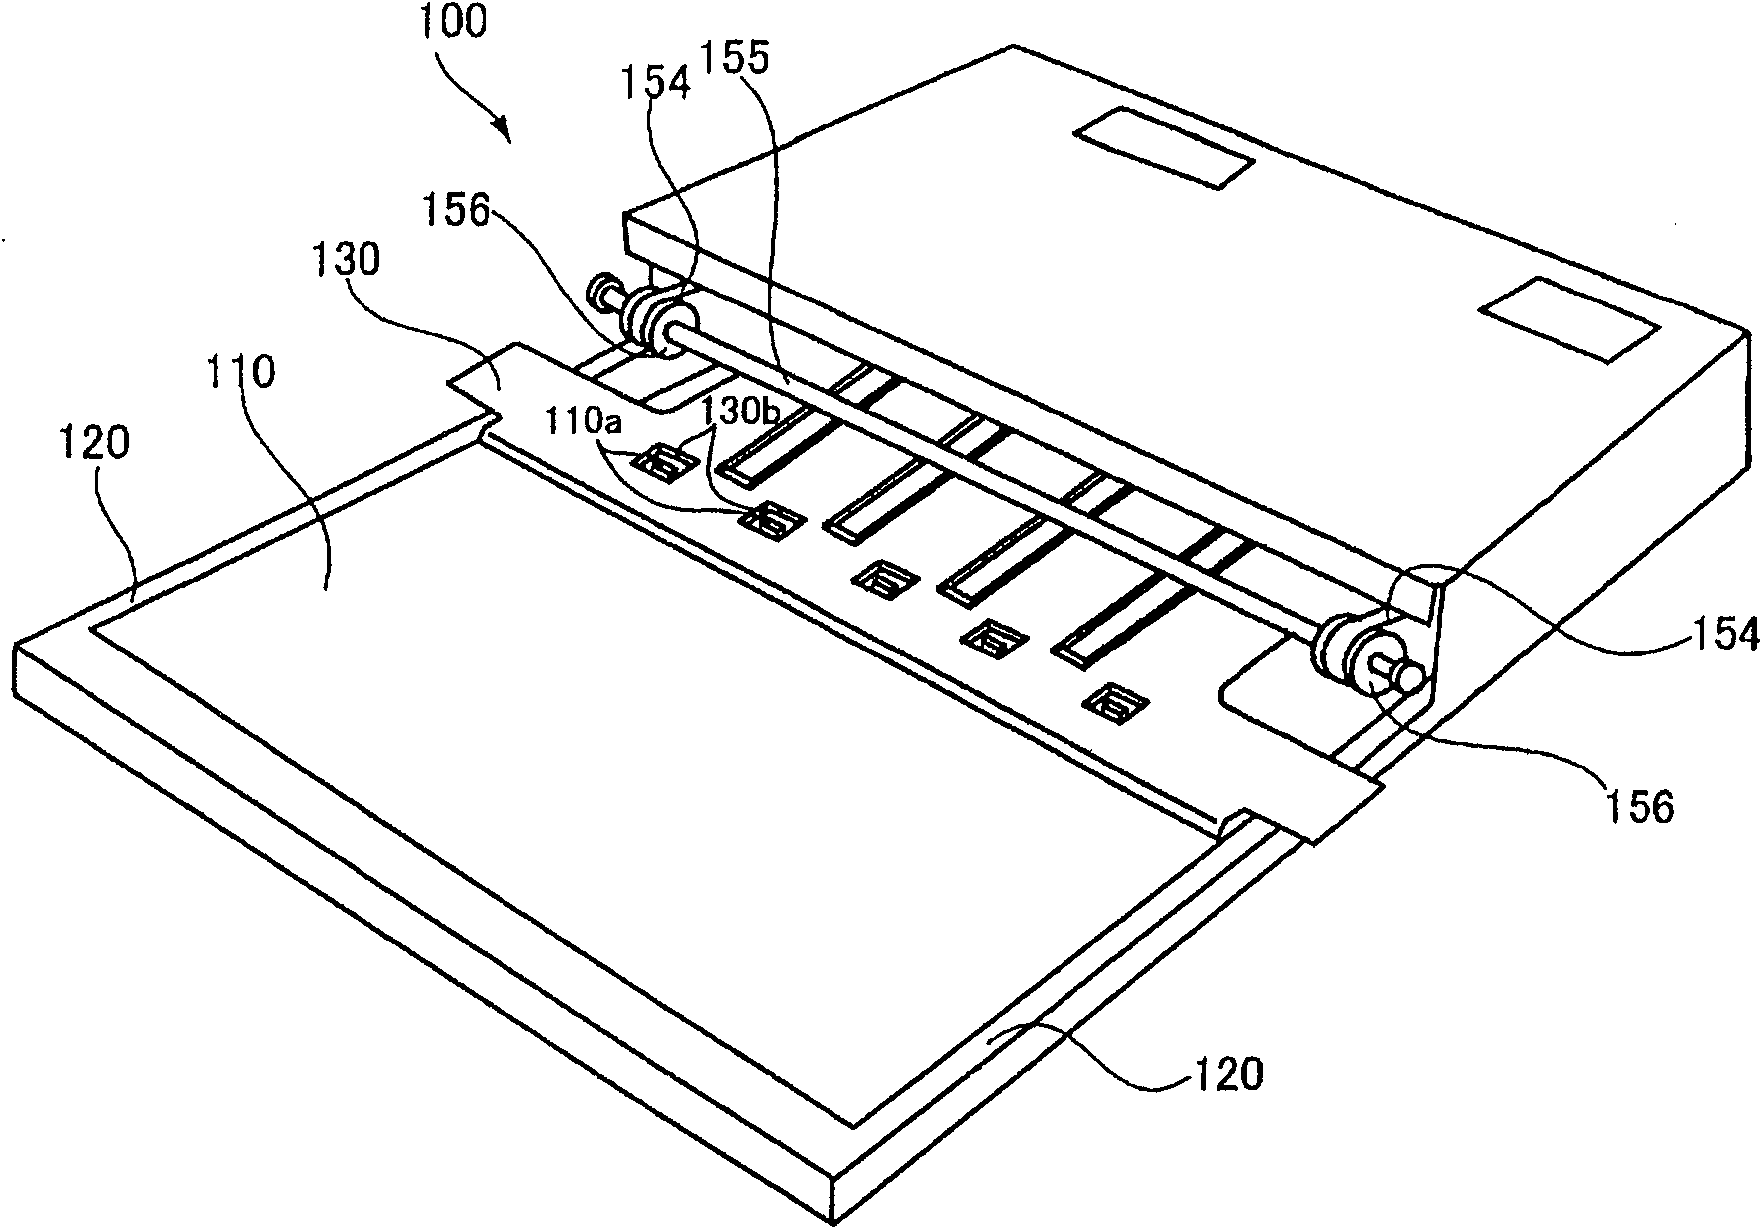 Shutter opening and closing apparatus